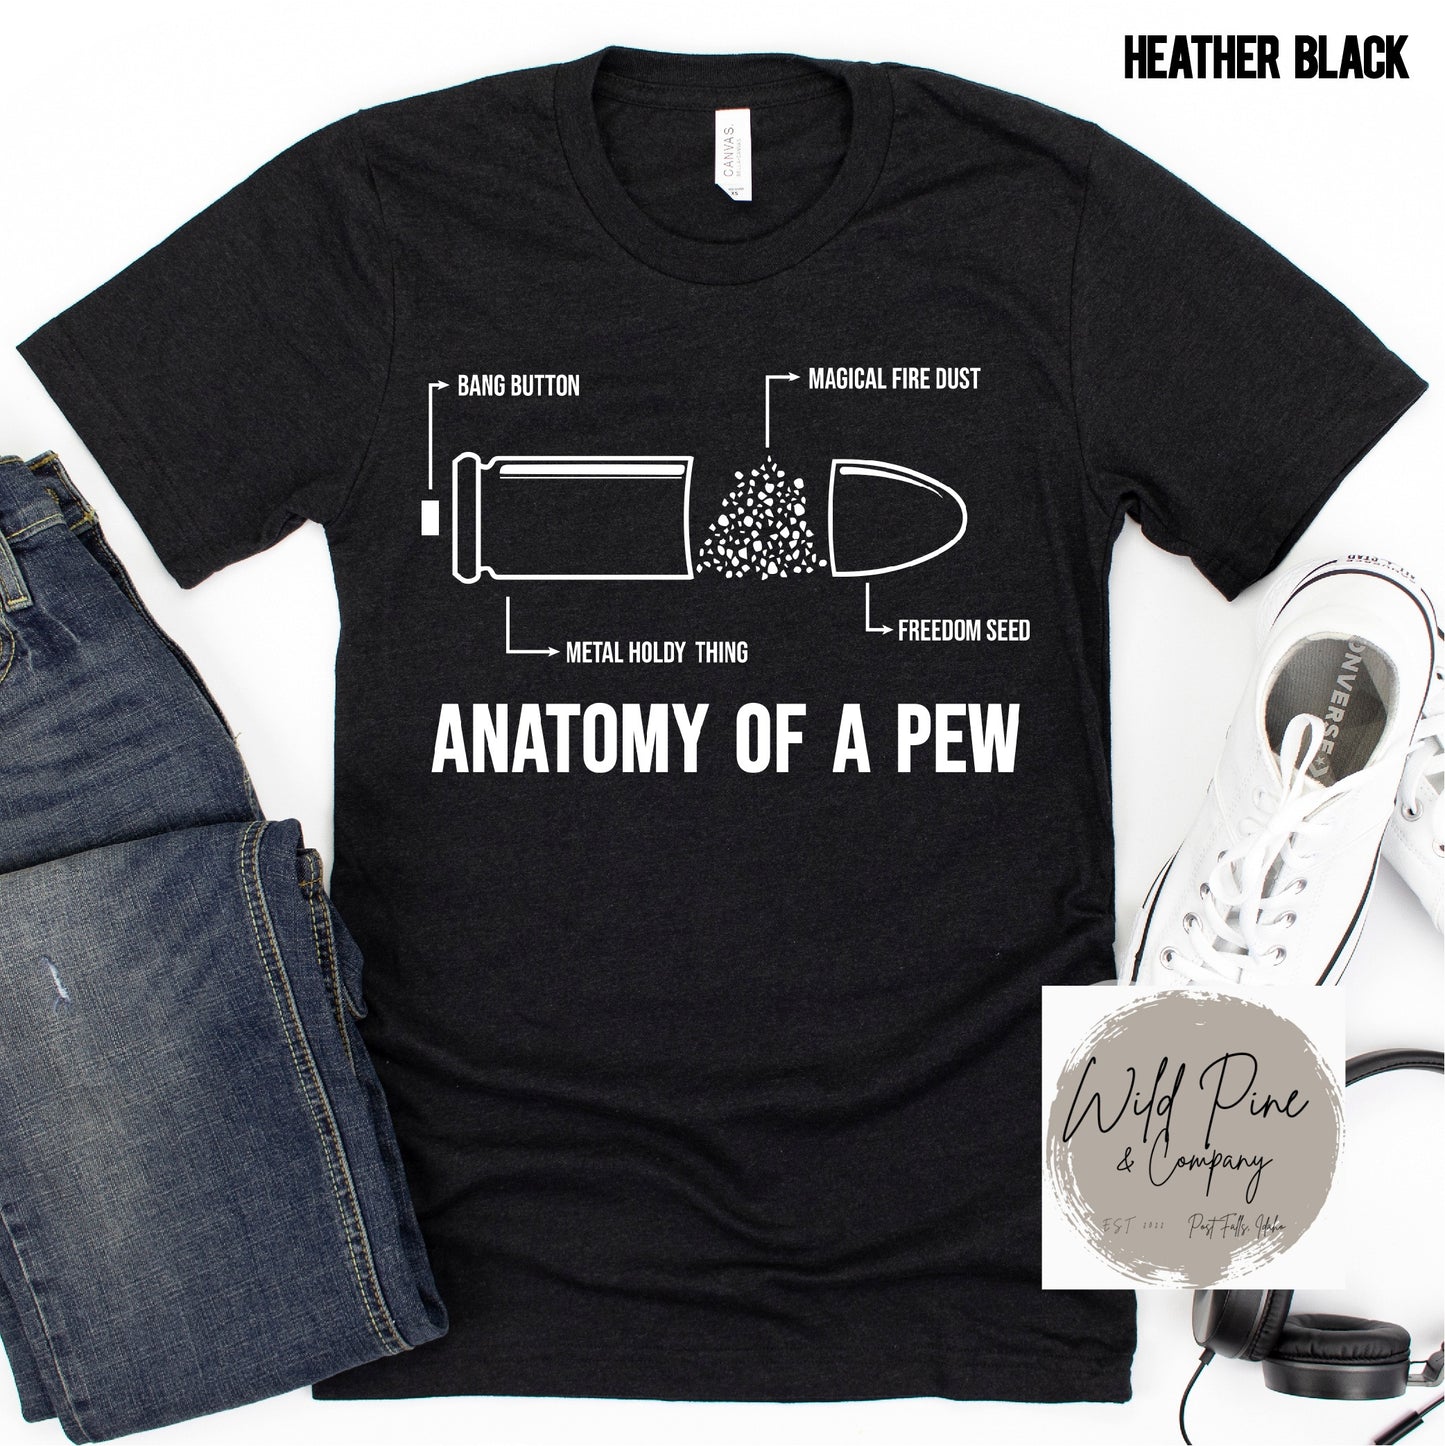 Anatomy of a pew (white)